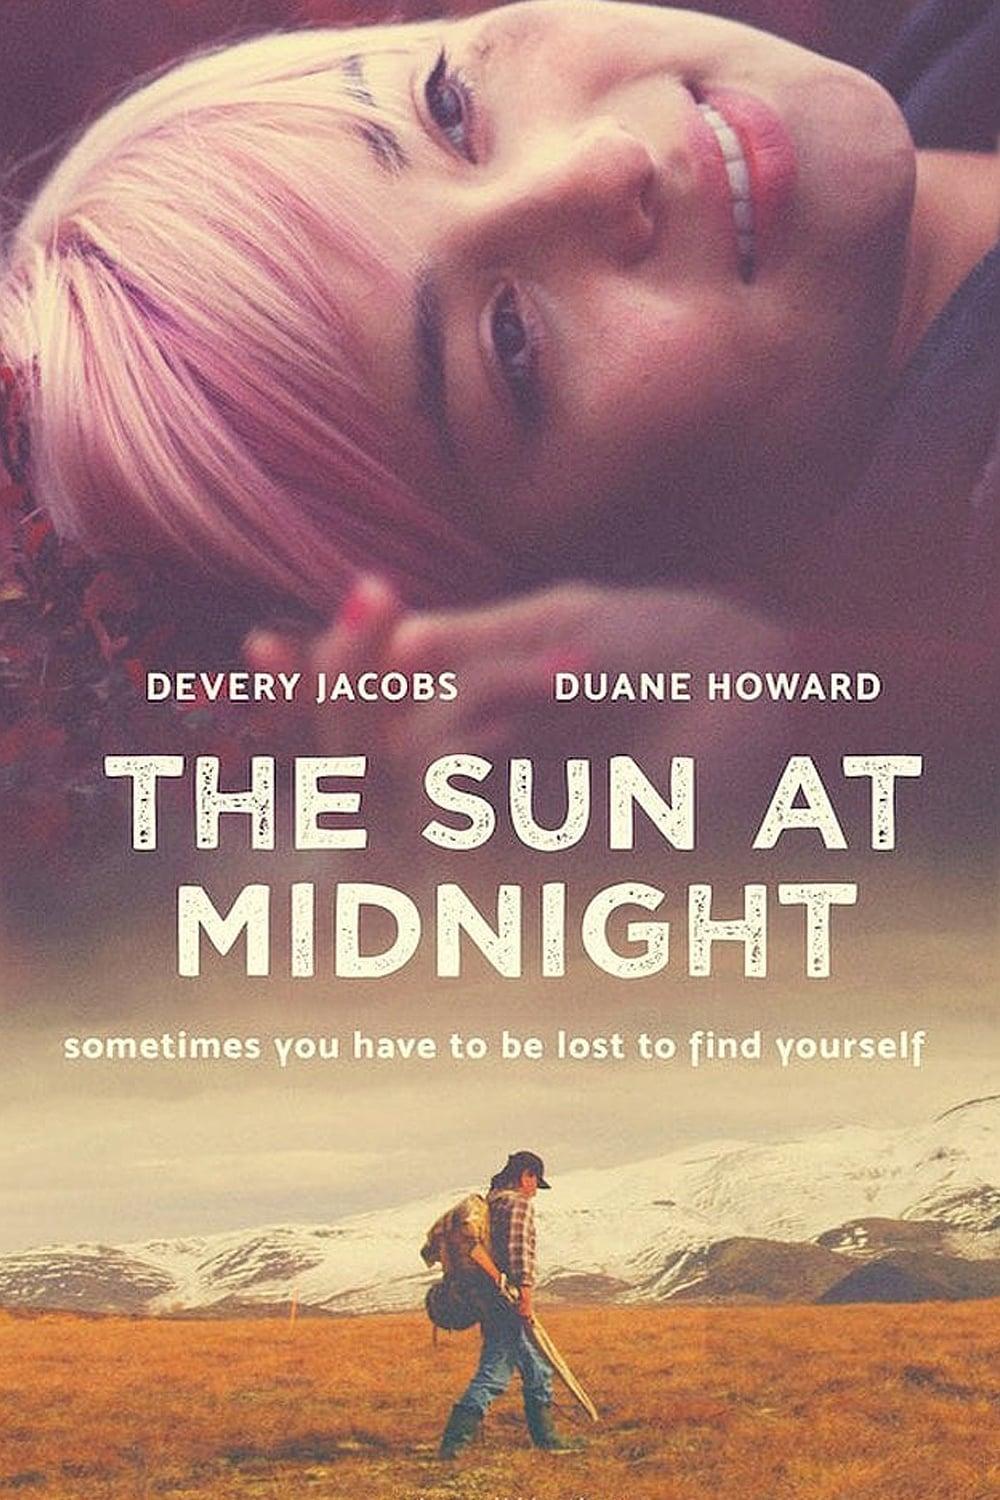 The Sun at Midnight poster